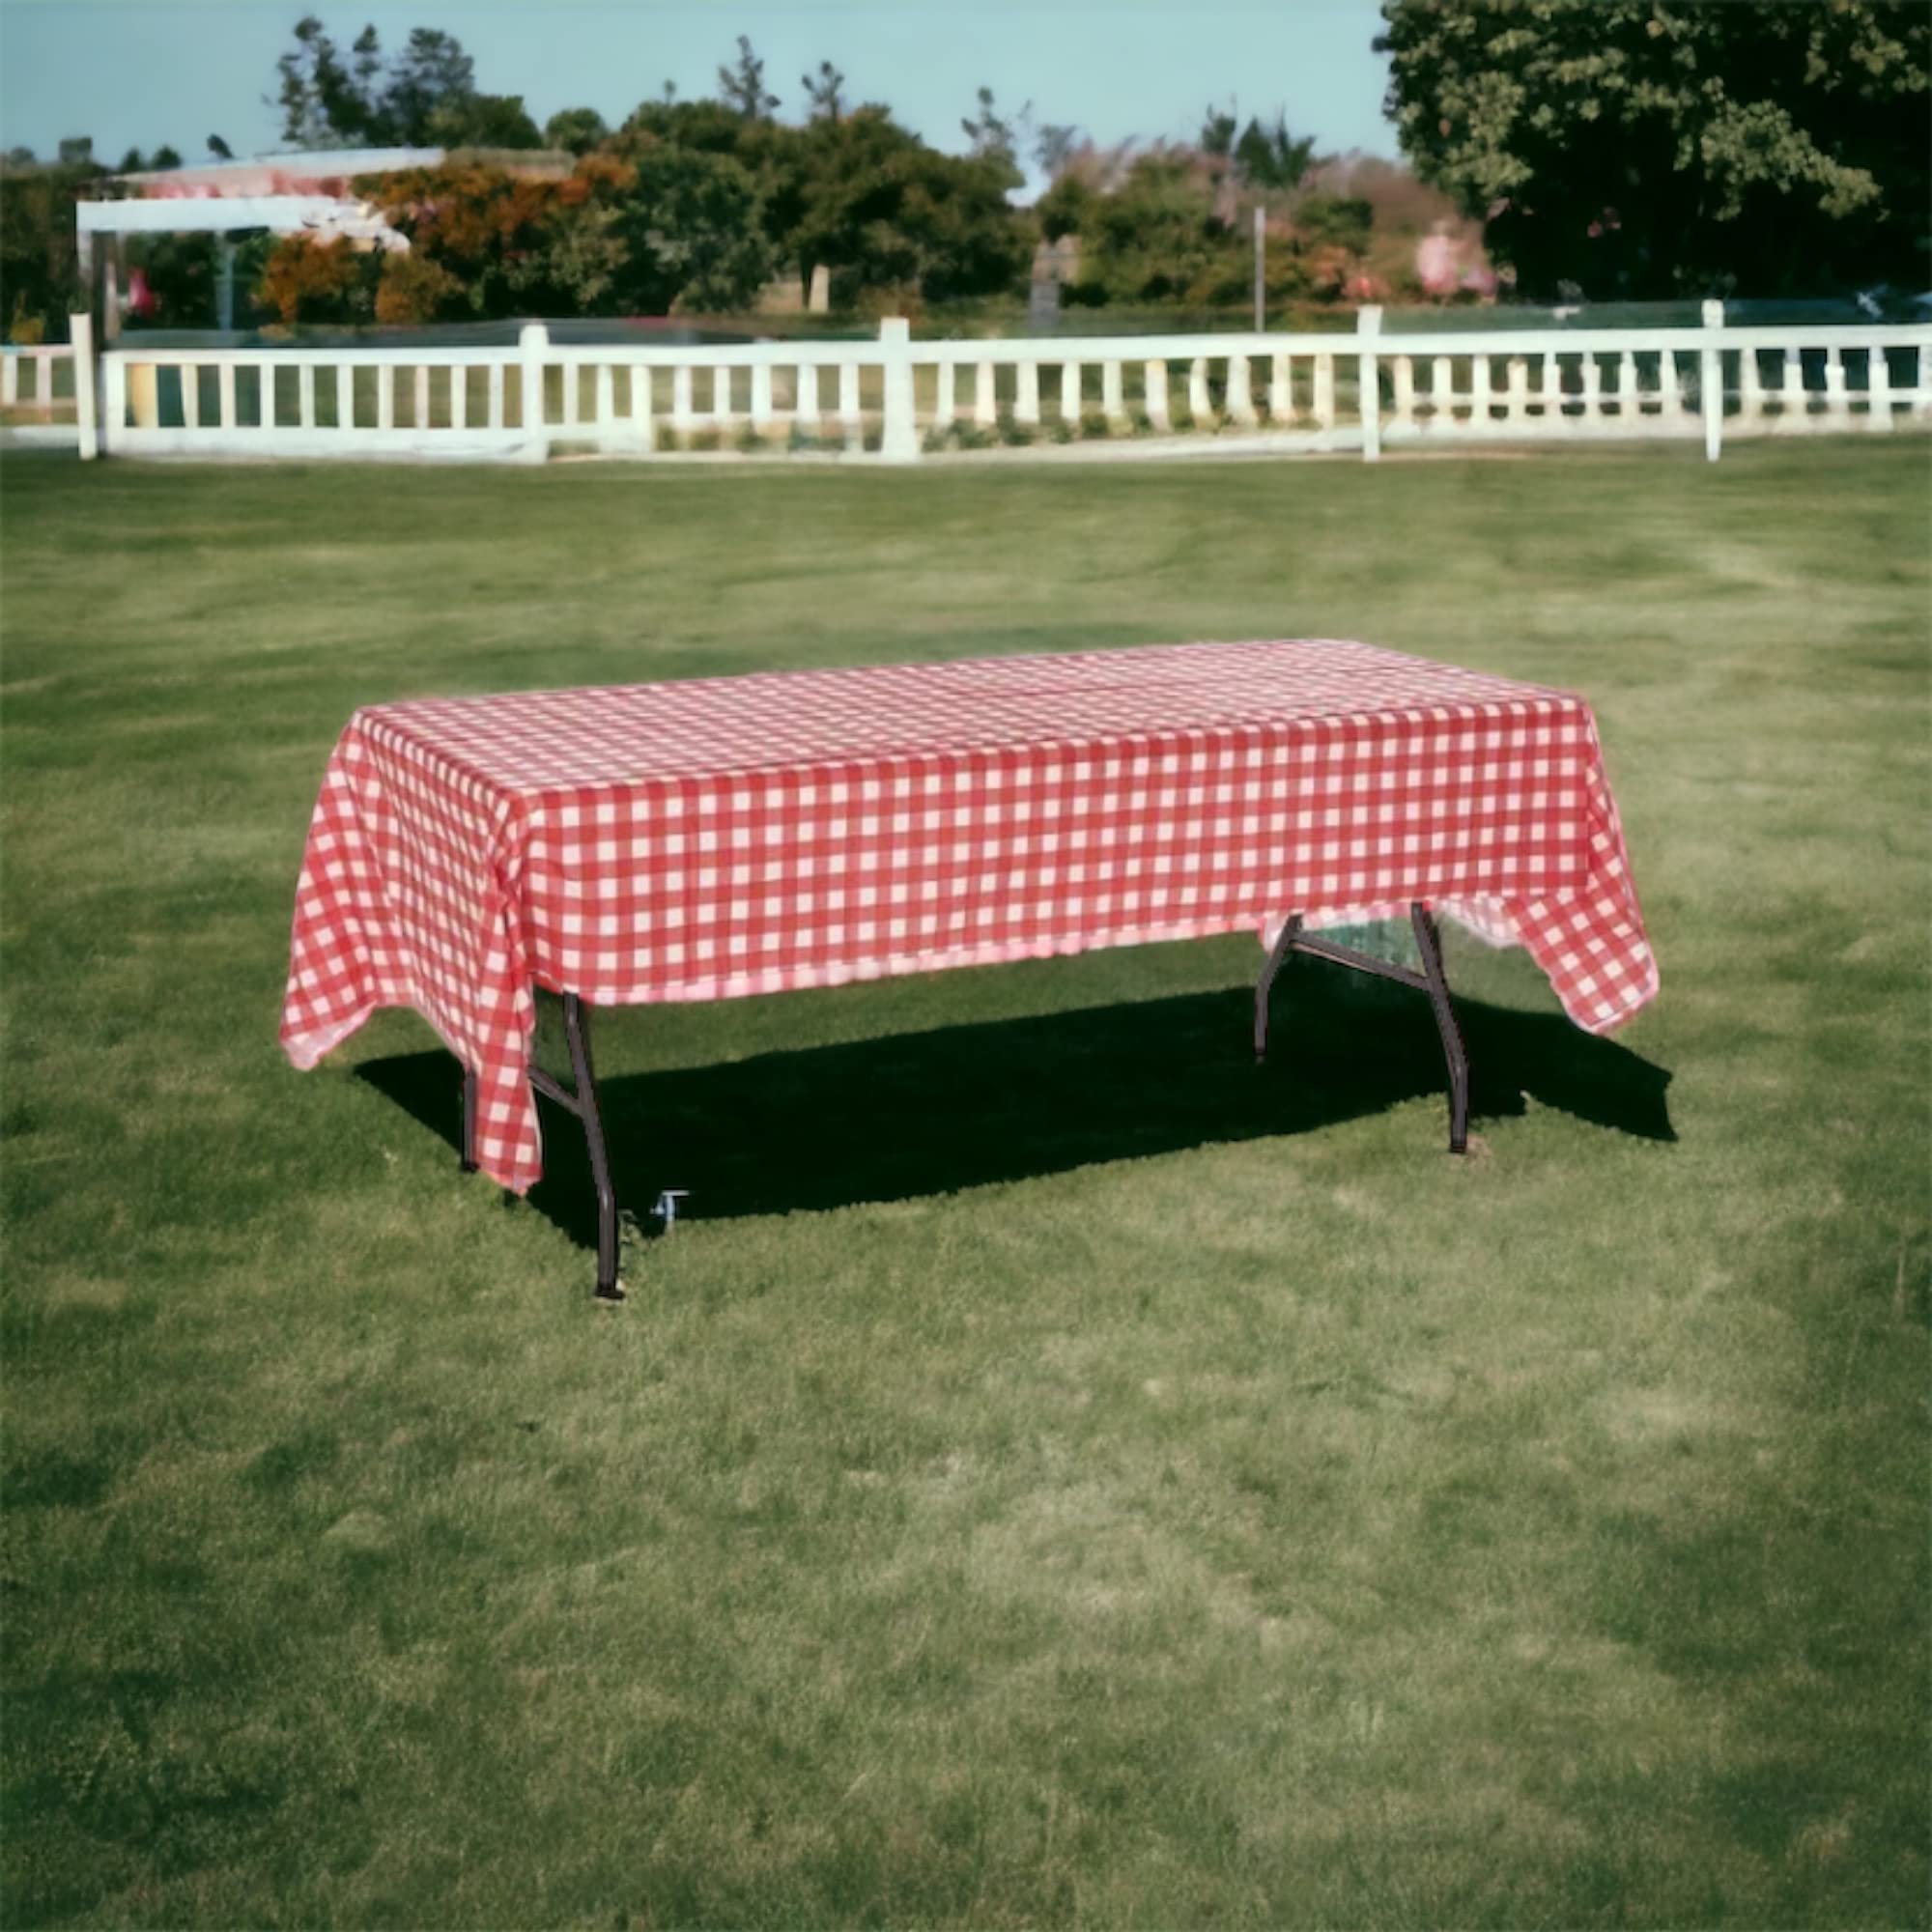 Oojami Pack of 4 Plastic Red and White Checkered Tablecloths - 4 Pack - Picnic Table Covers